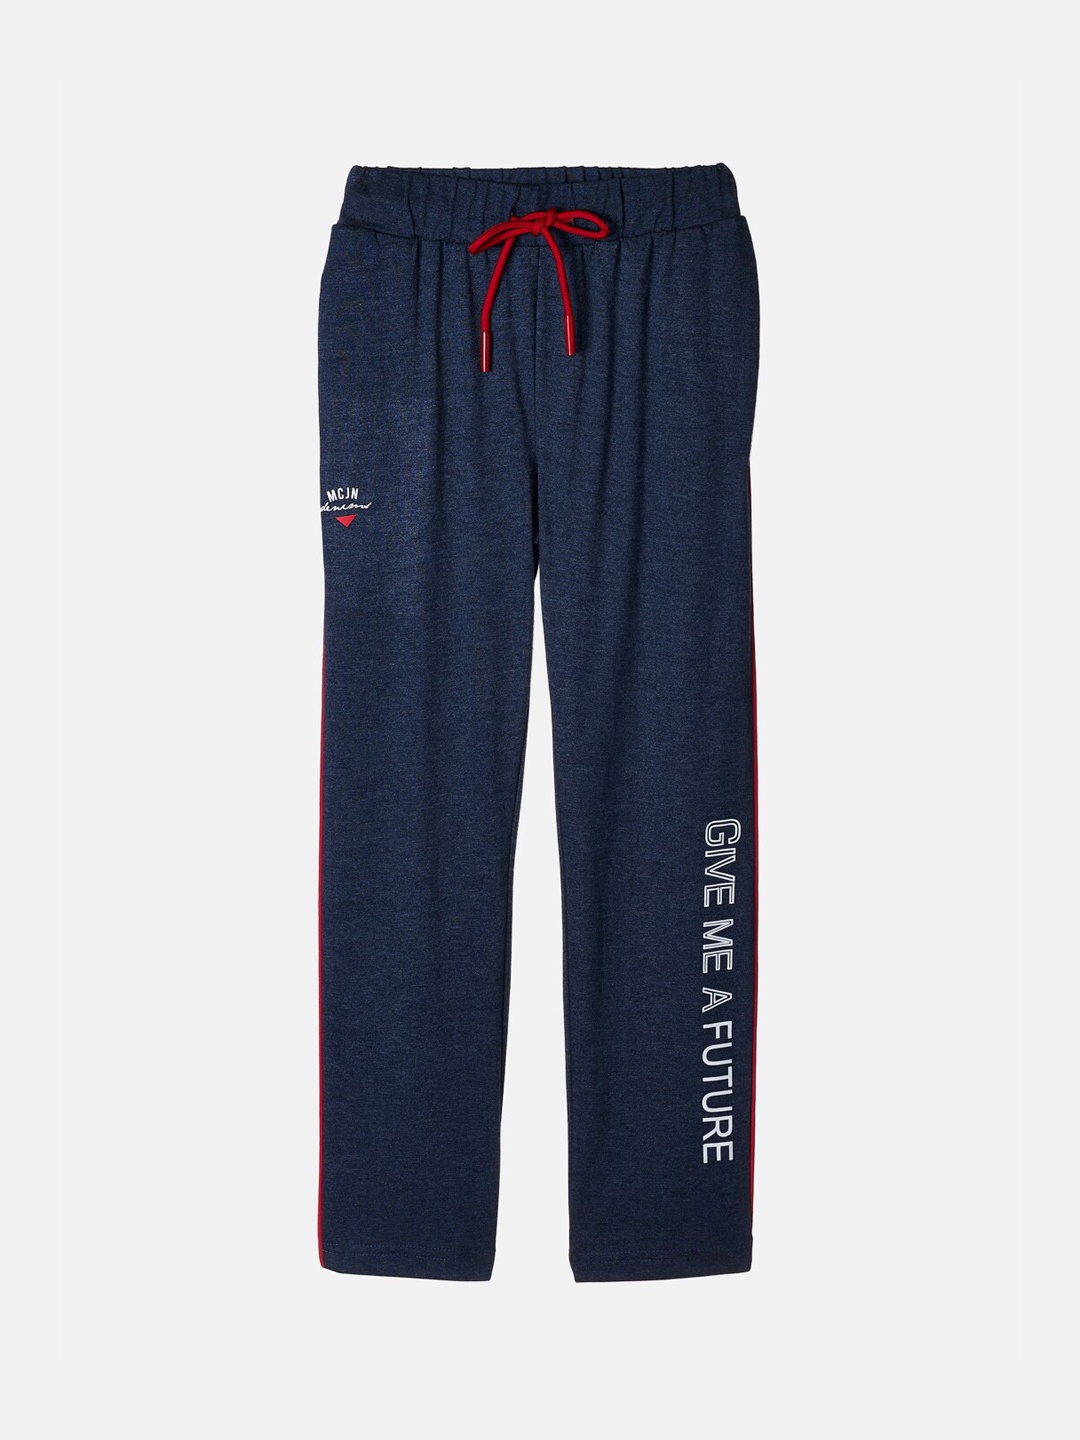 

Monte Carlo Boys Blue Typography Printed Track Pants